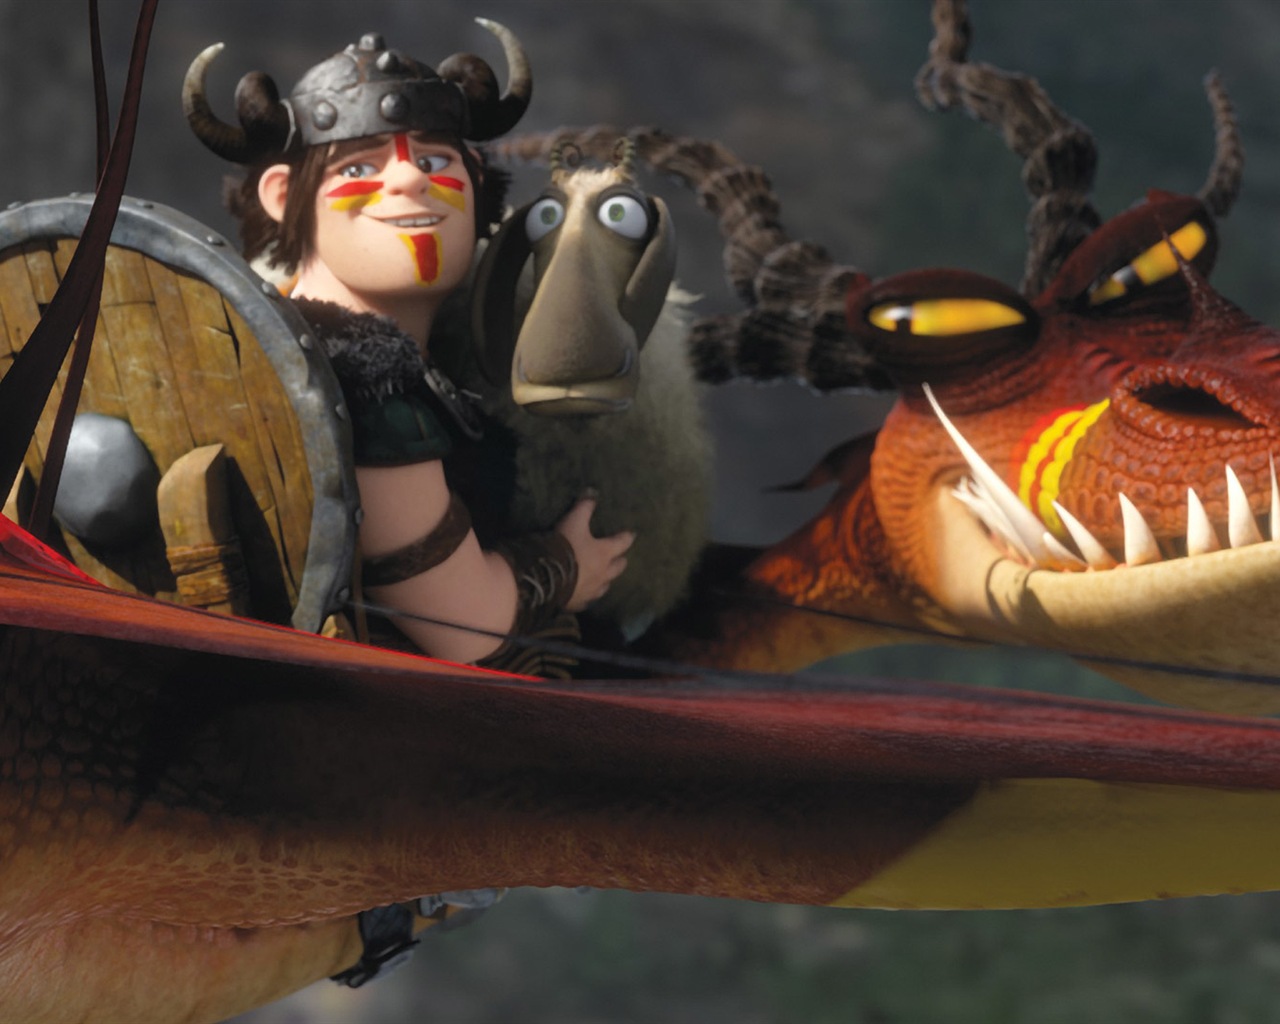 How to Train Your Dragon 2 驯龙高手2 高清壁纸7 - 1280x1024